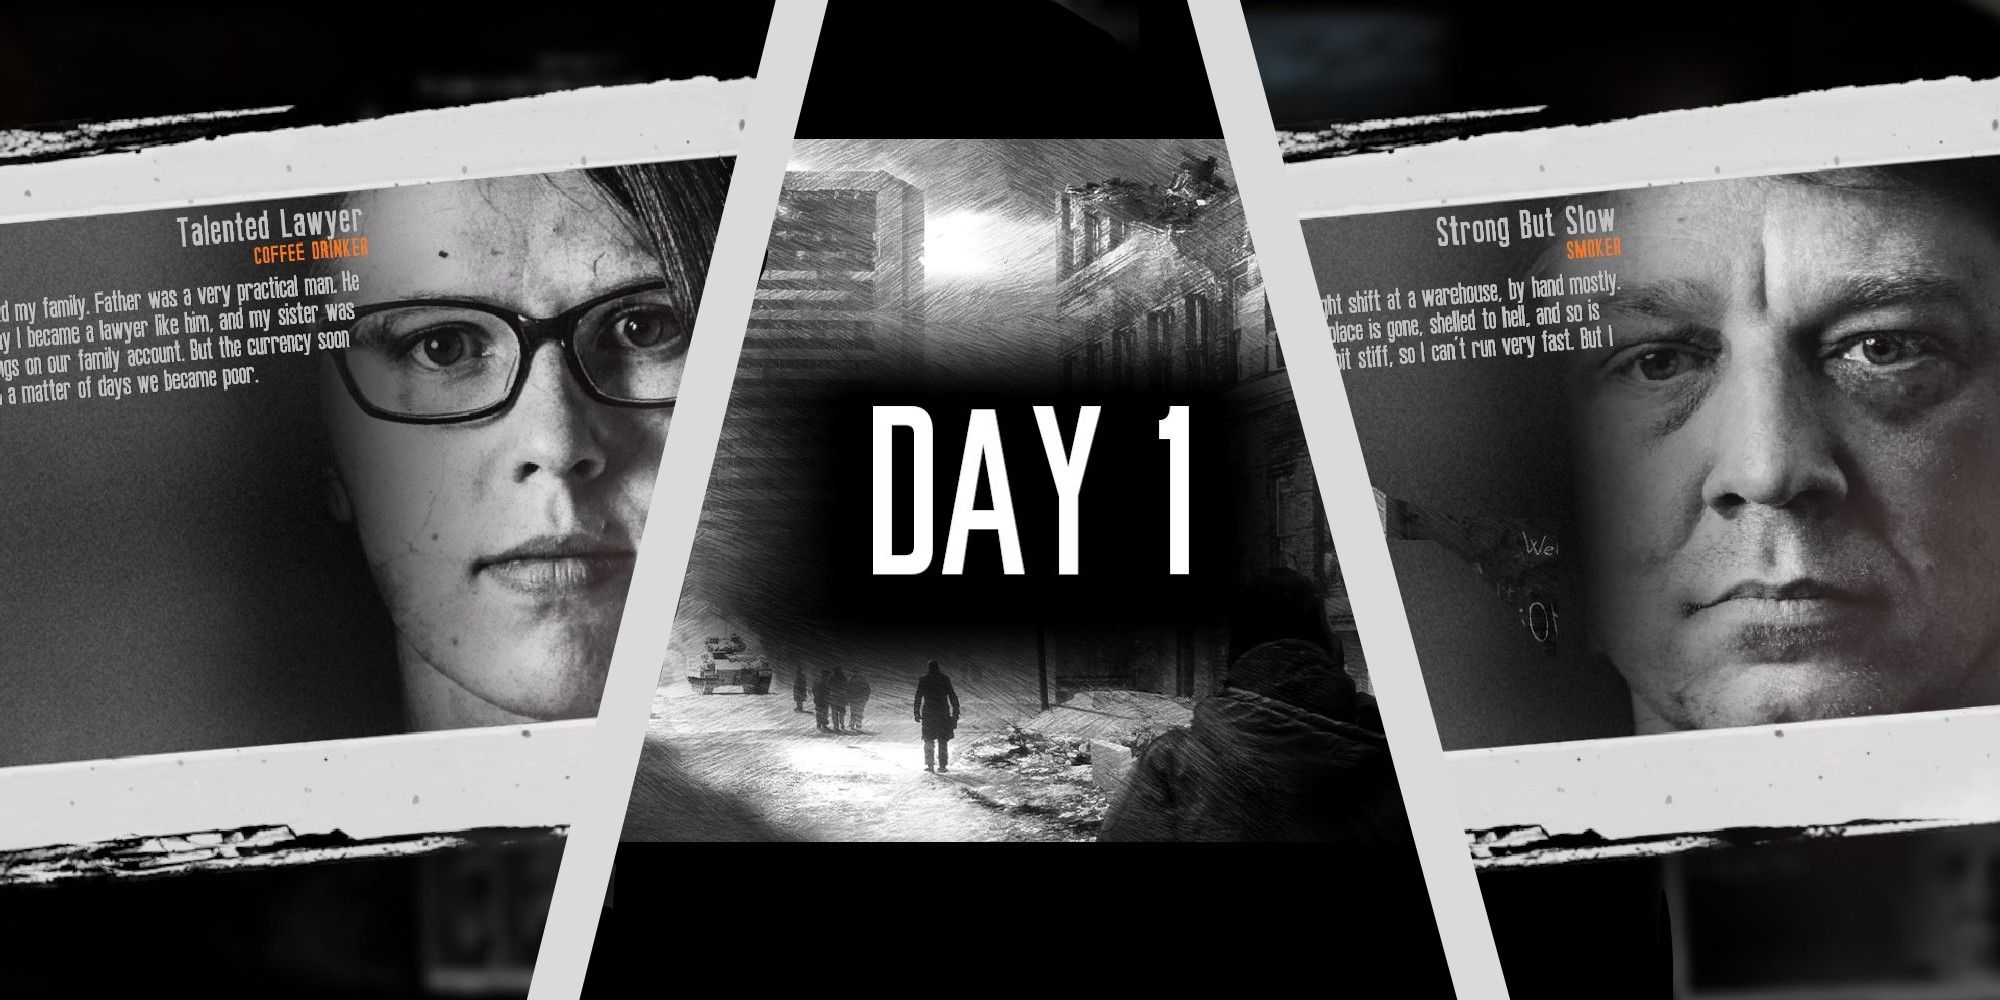 This War Of Mine Feature Image Emilia and Boris on both sides and Day 1 screenshot in the middle